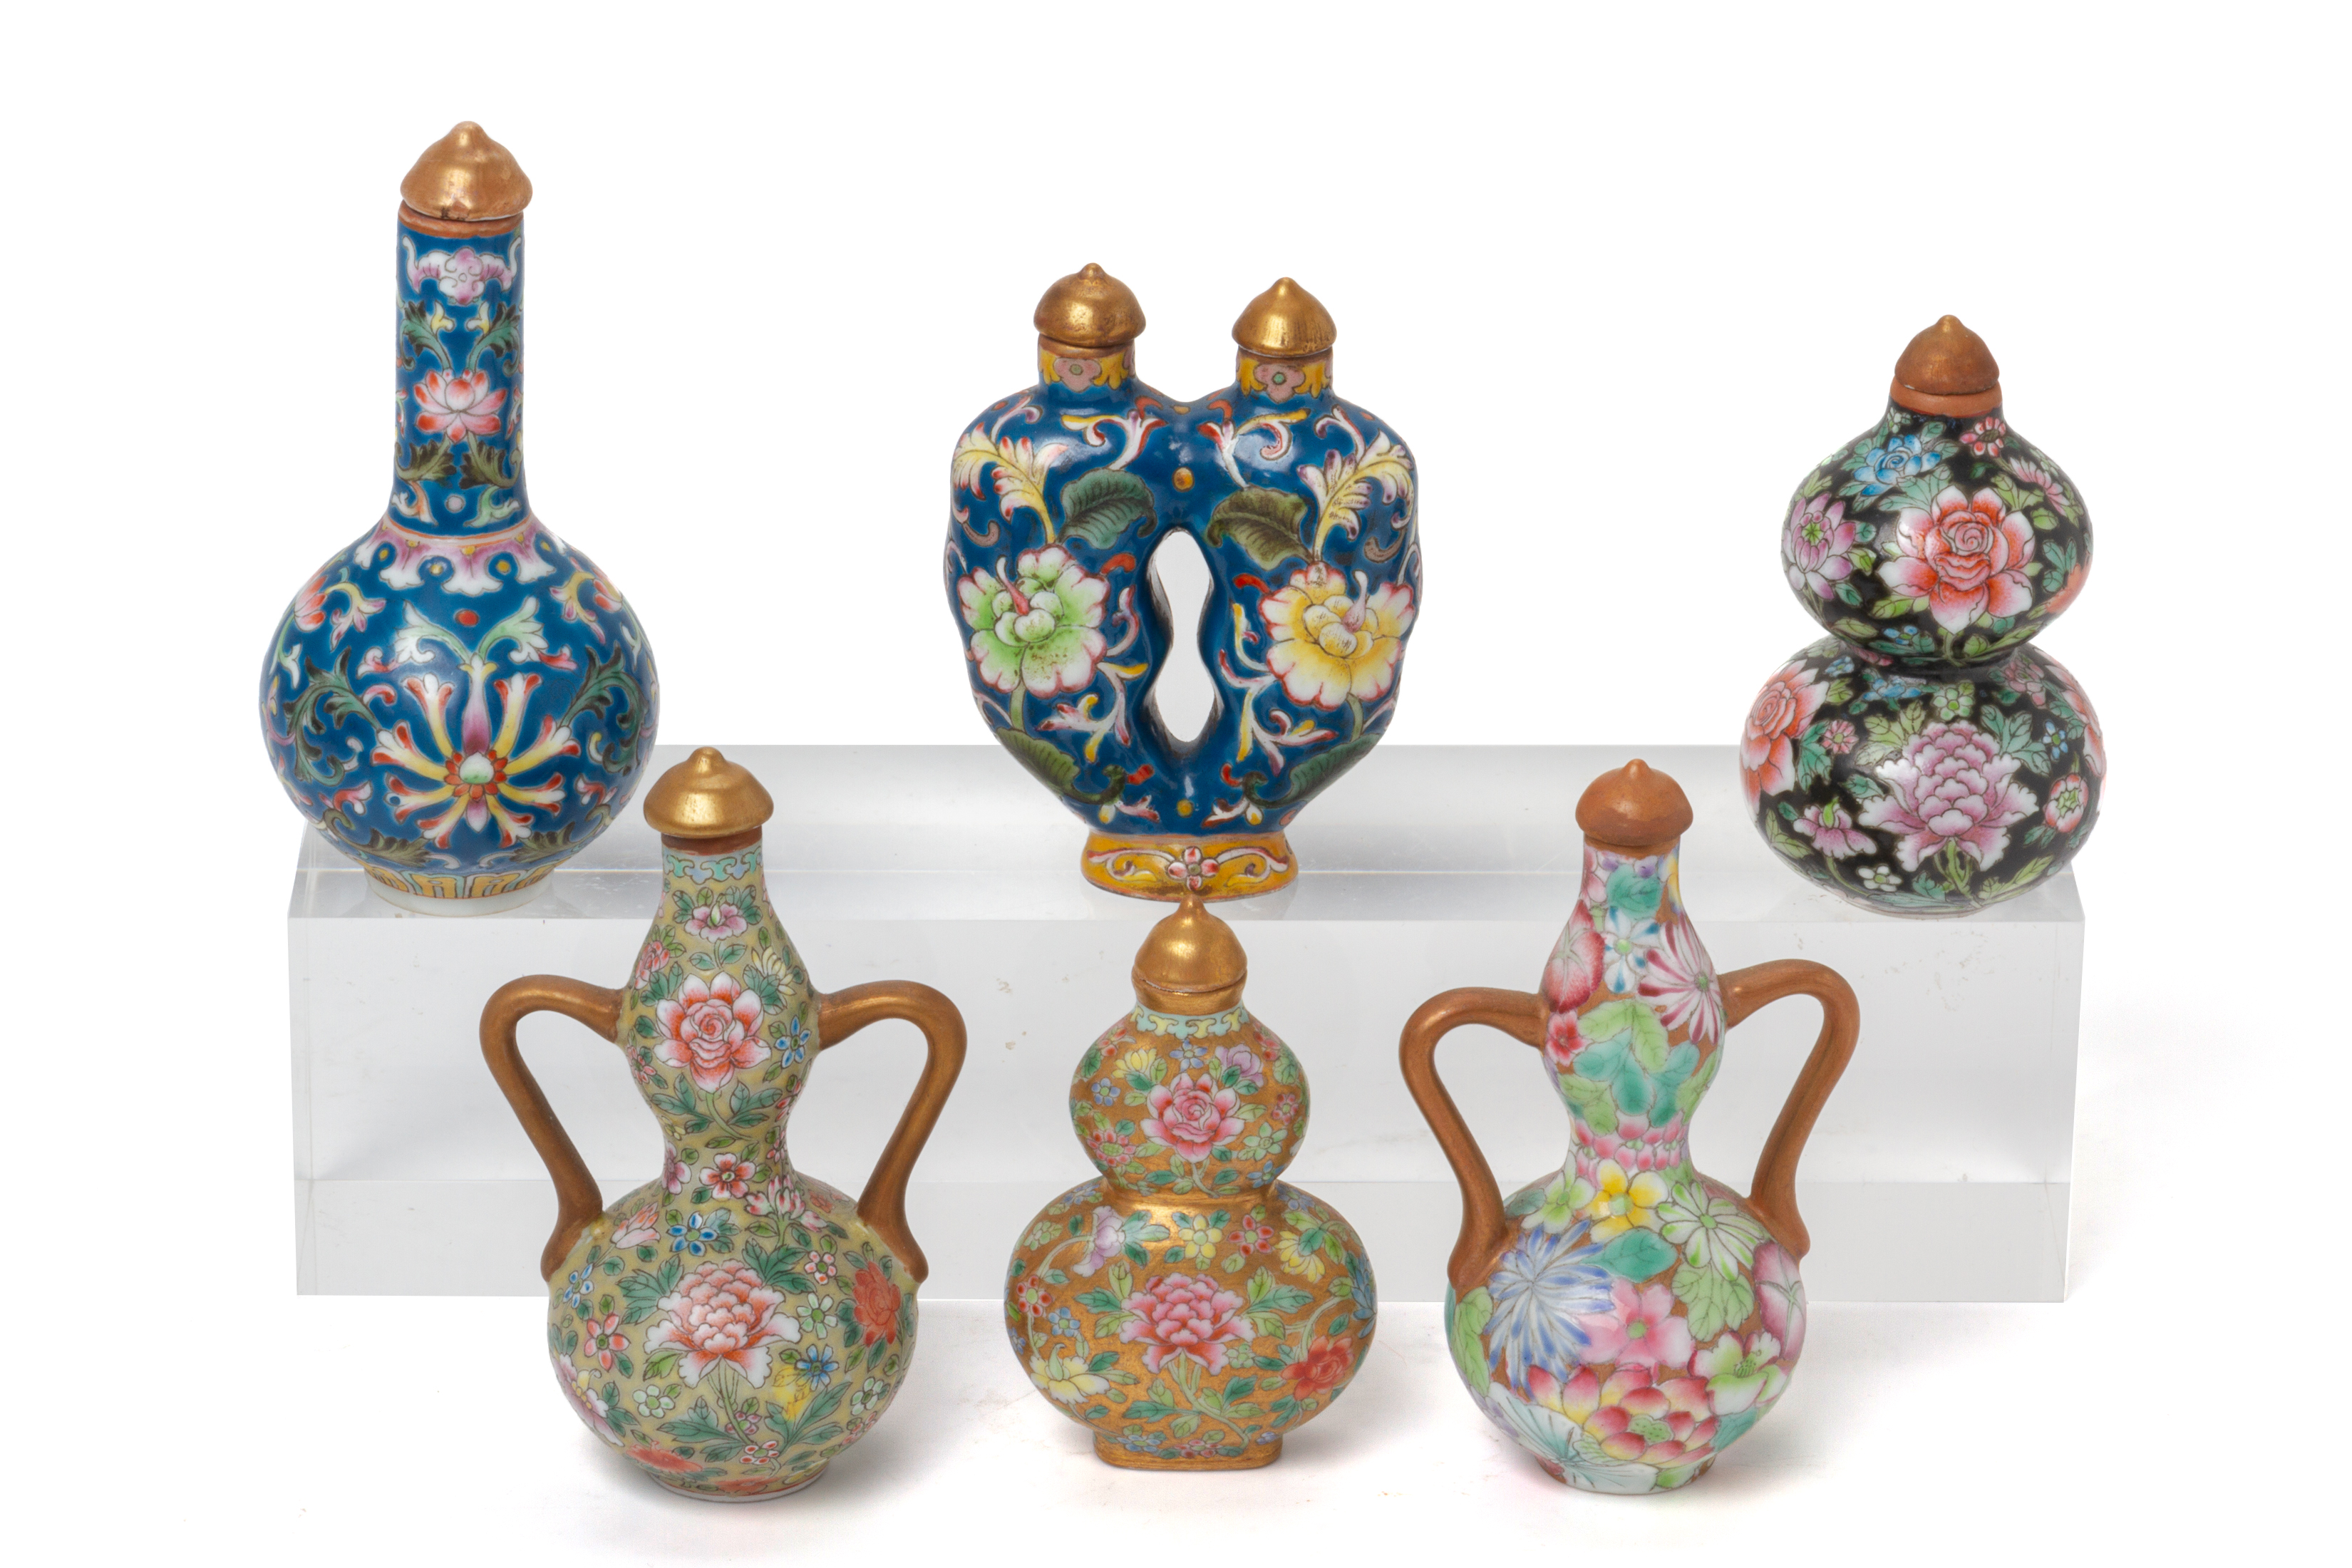 A GROUP OF SIX POLYCHROME ENAMELLED PORCELAIN SNUFF BOTTLES